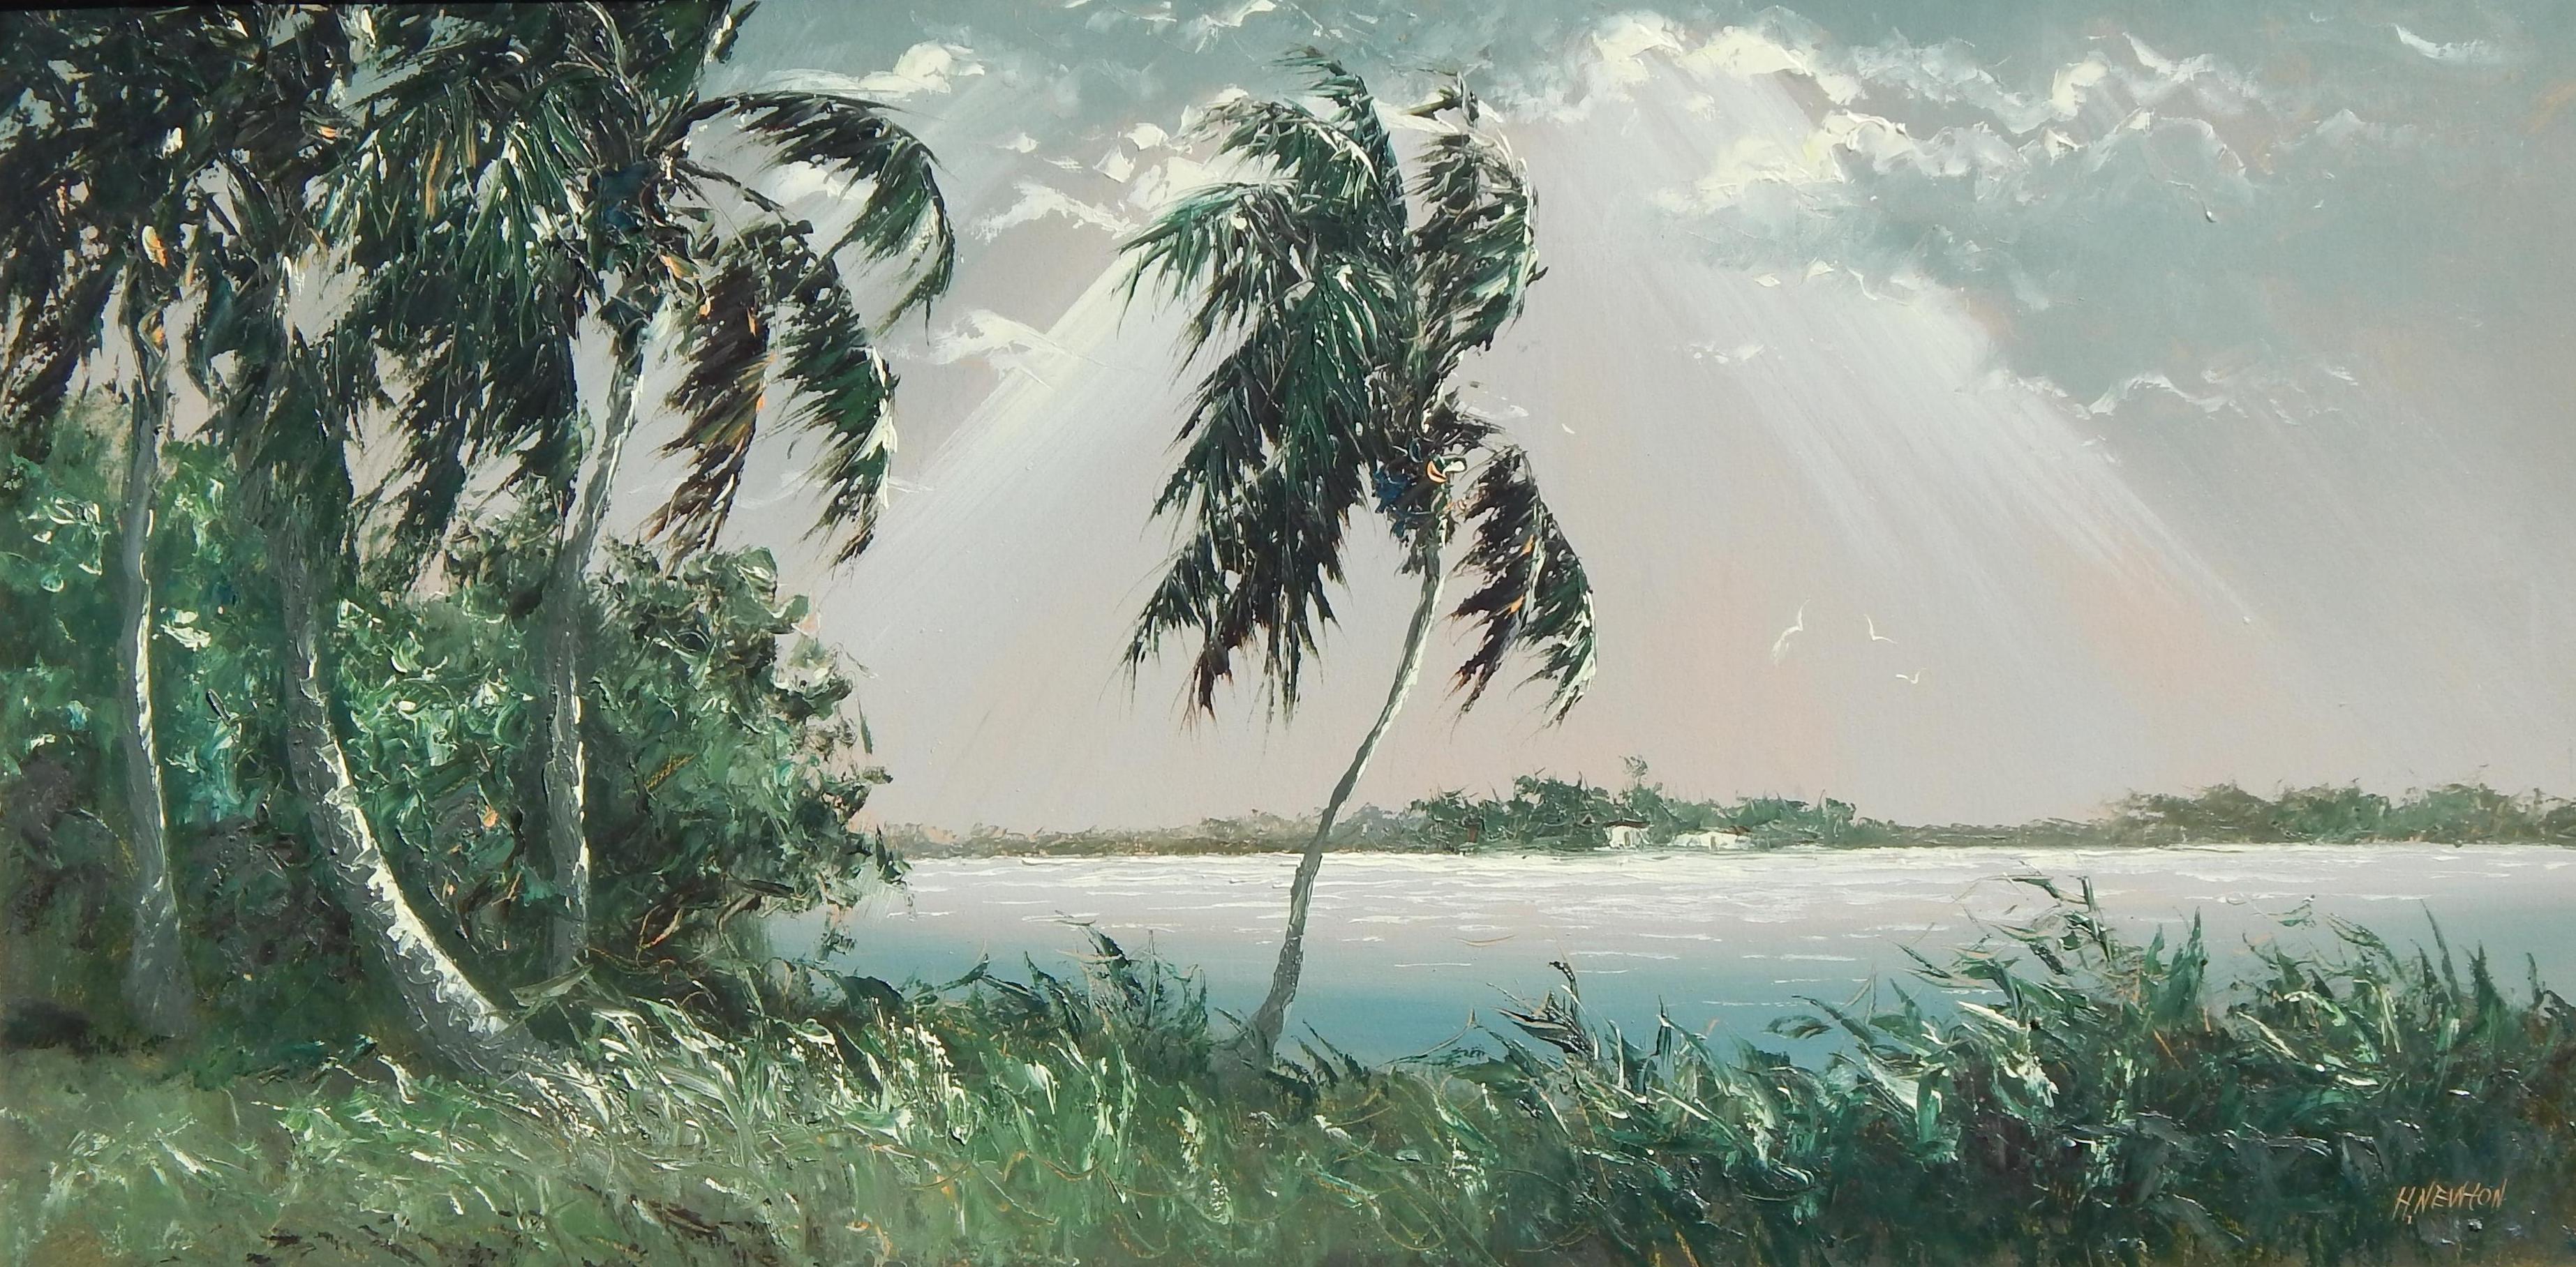 Morning Sunlight Florida beach scene - Signed lower right
Oil on board in excellent condition.
By African American artist Harold Newton (1934-1994)
Painting measures: 24